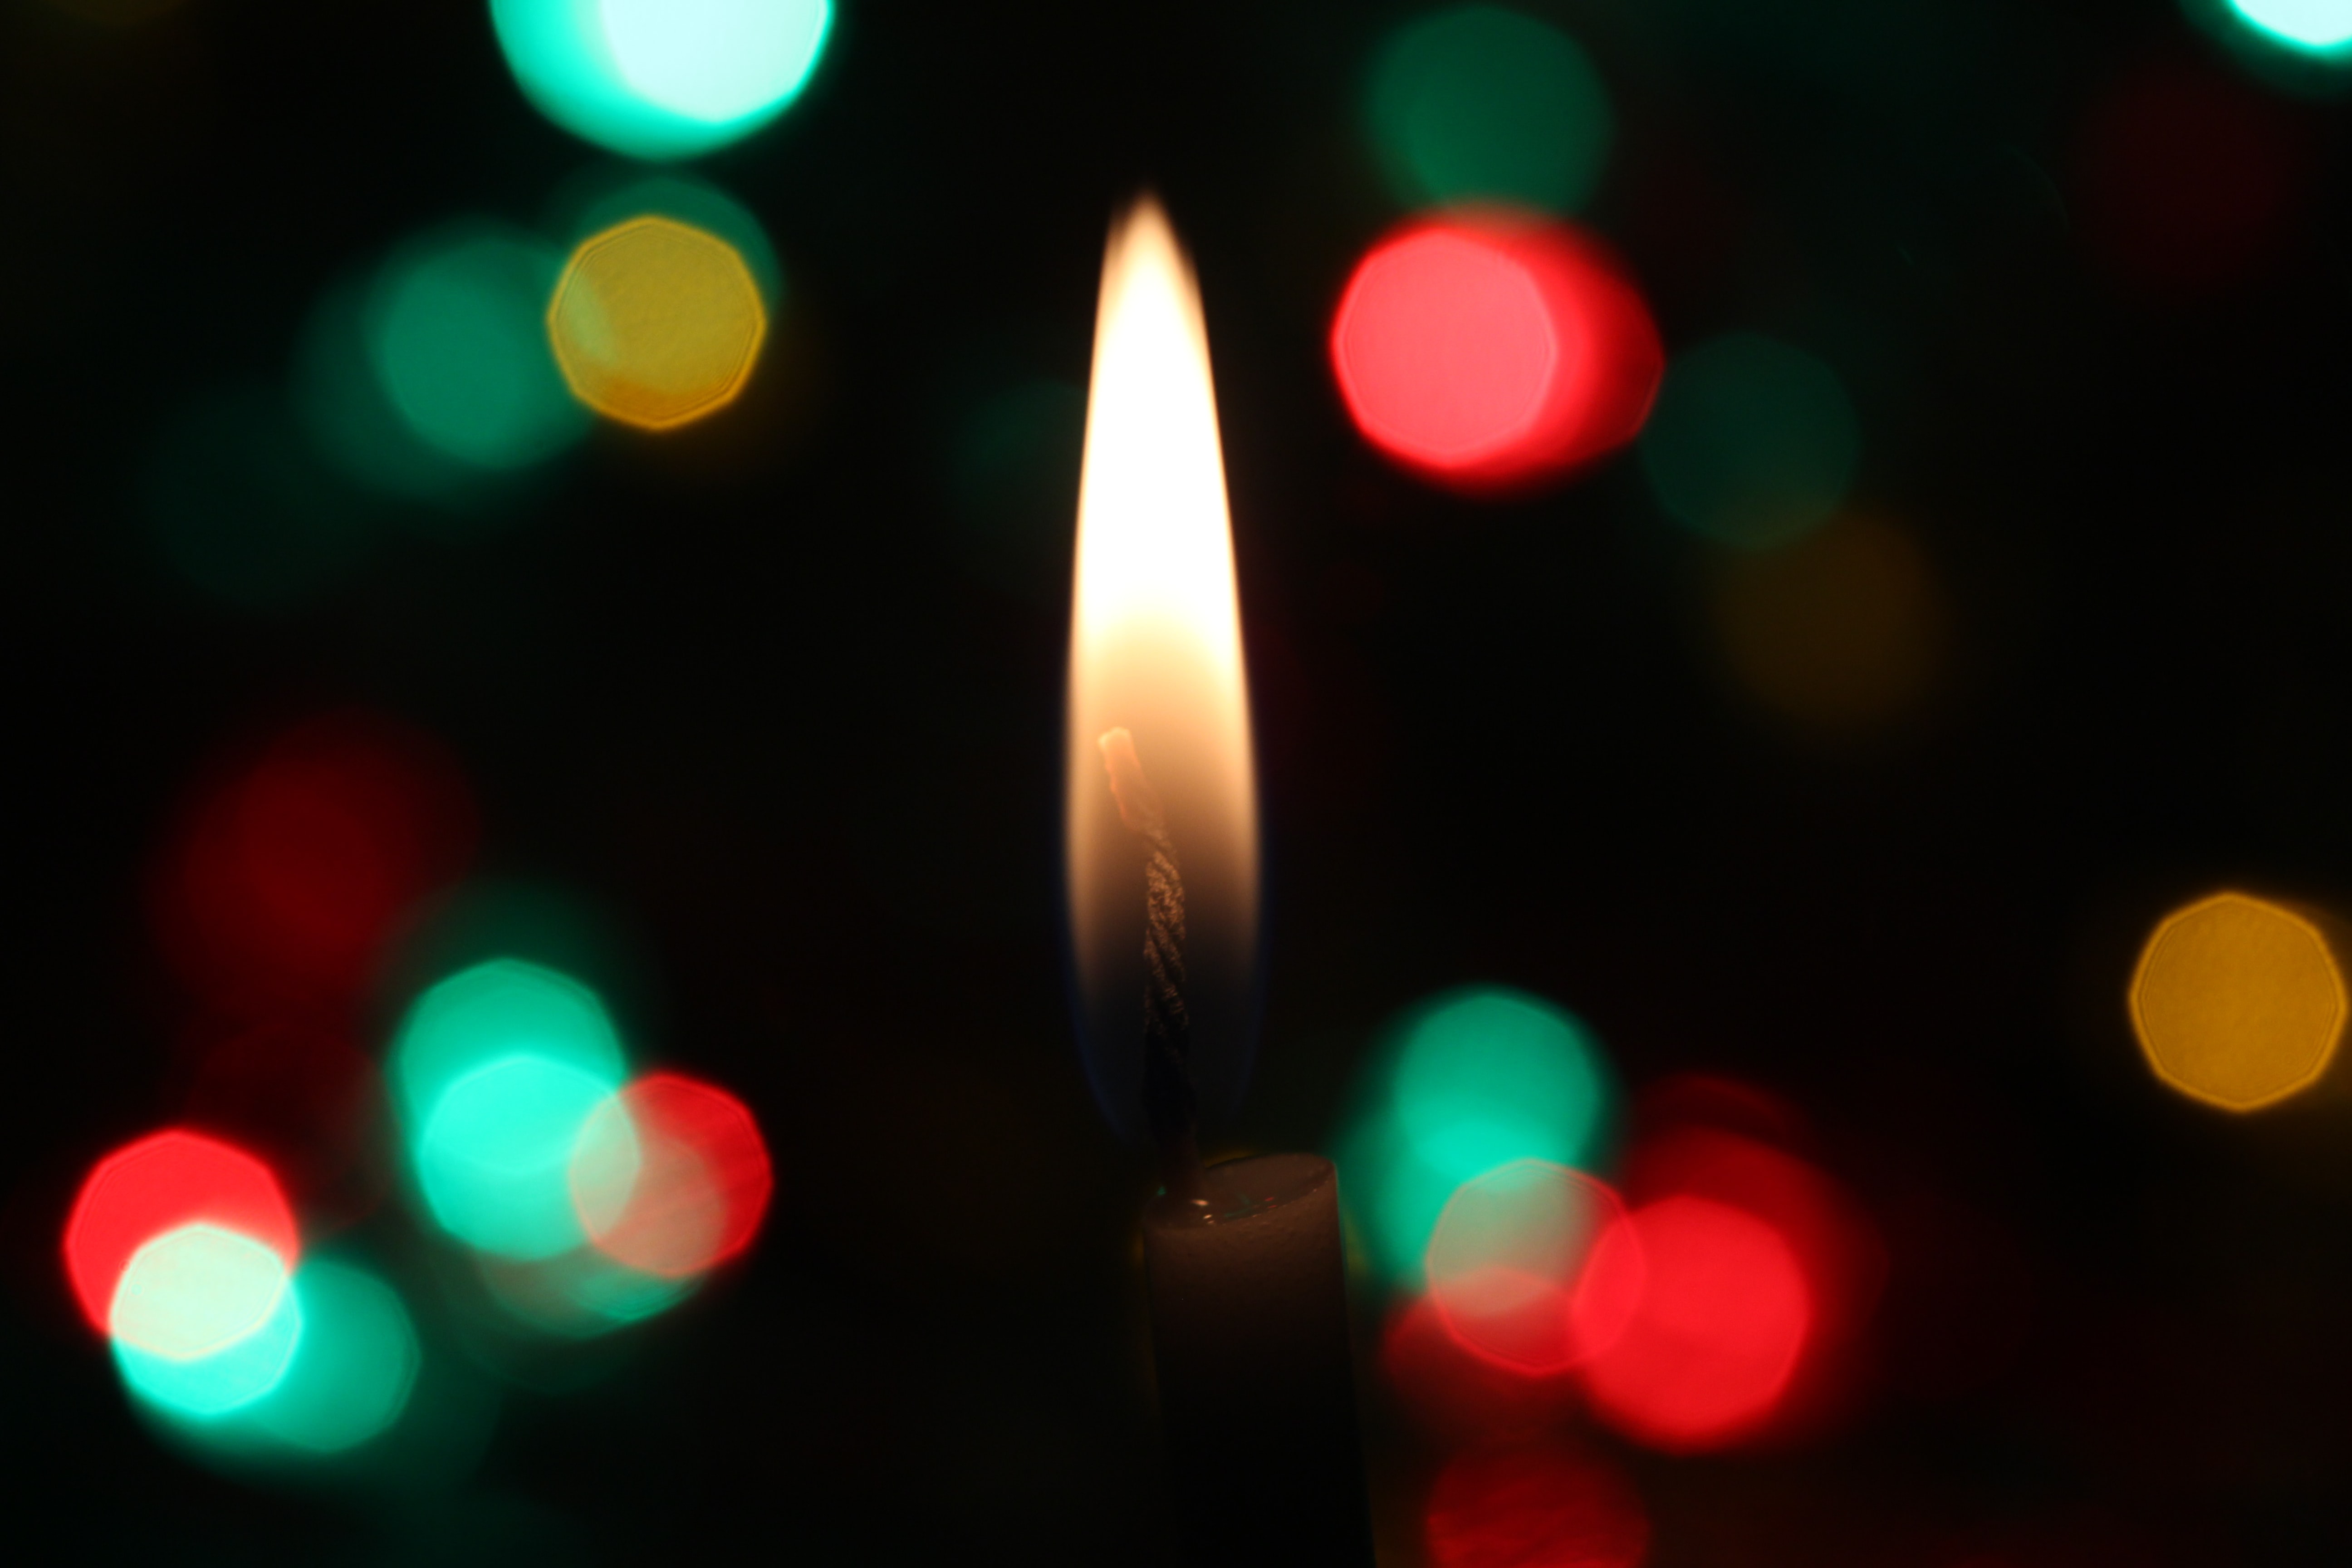 Photo of Christmas candles from David Sonluna from Unsplash